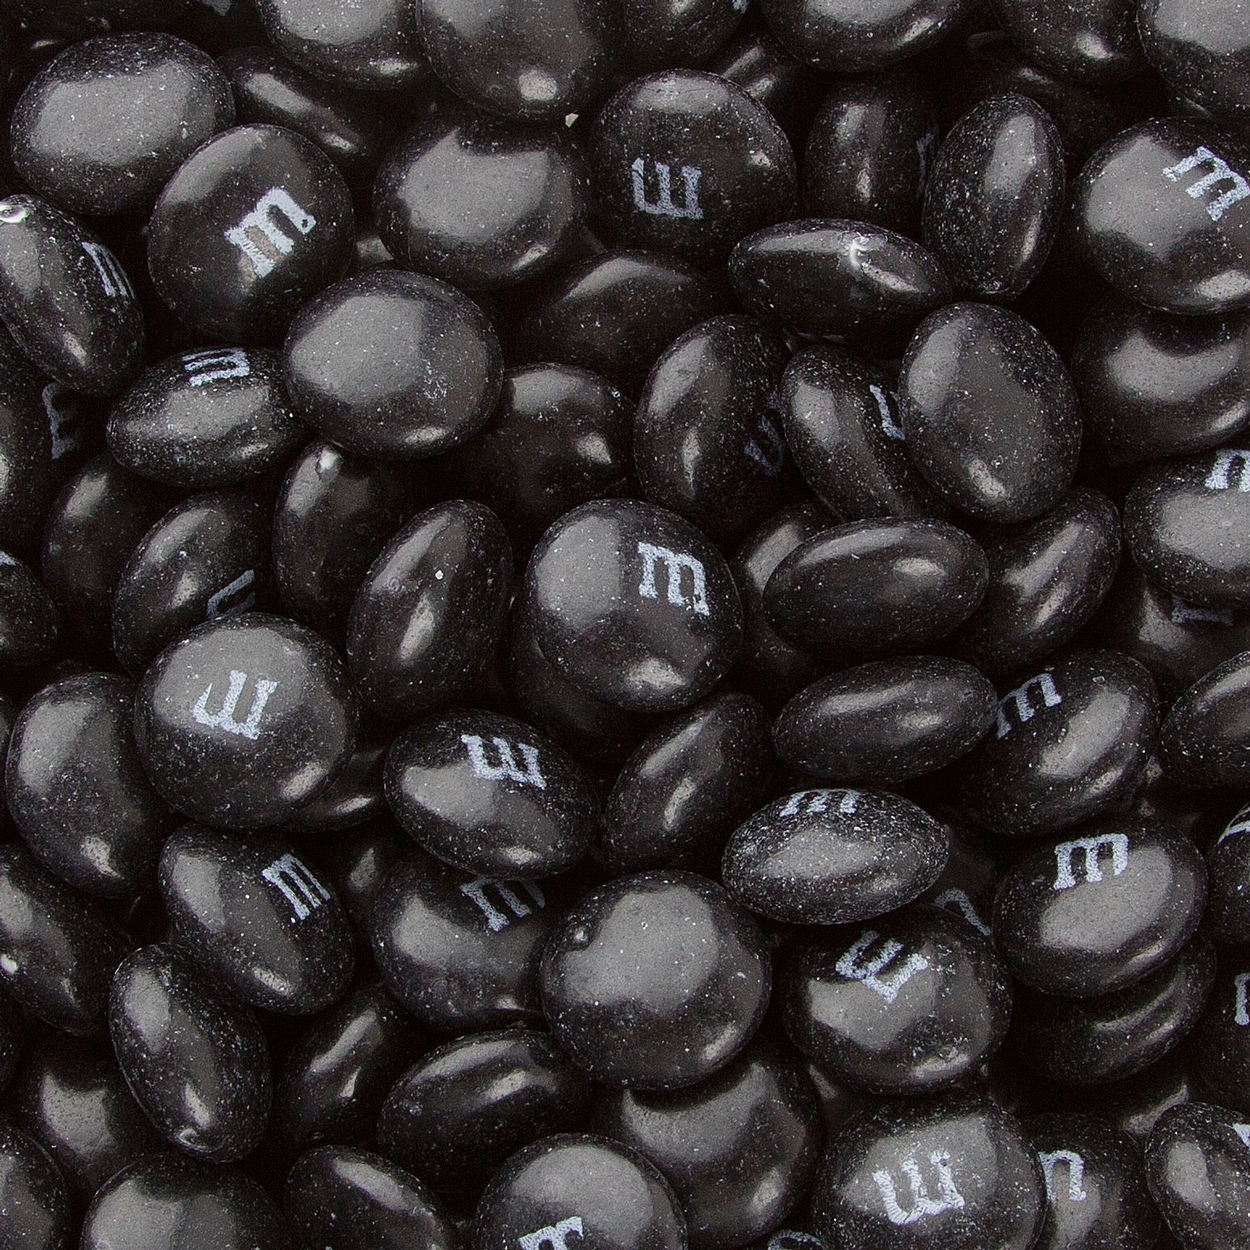 Black M&M's Chocolate Candy • Oh! Nuts®